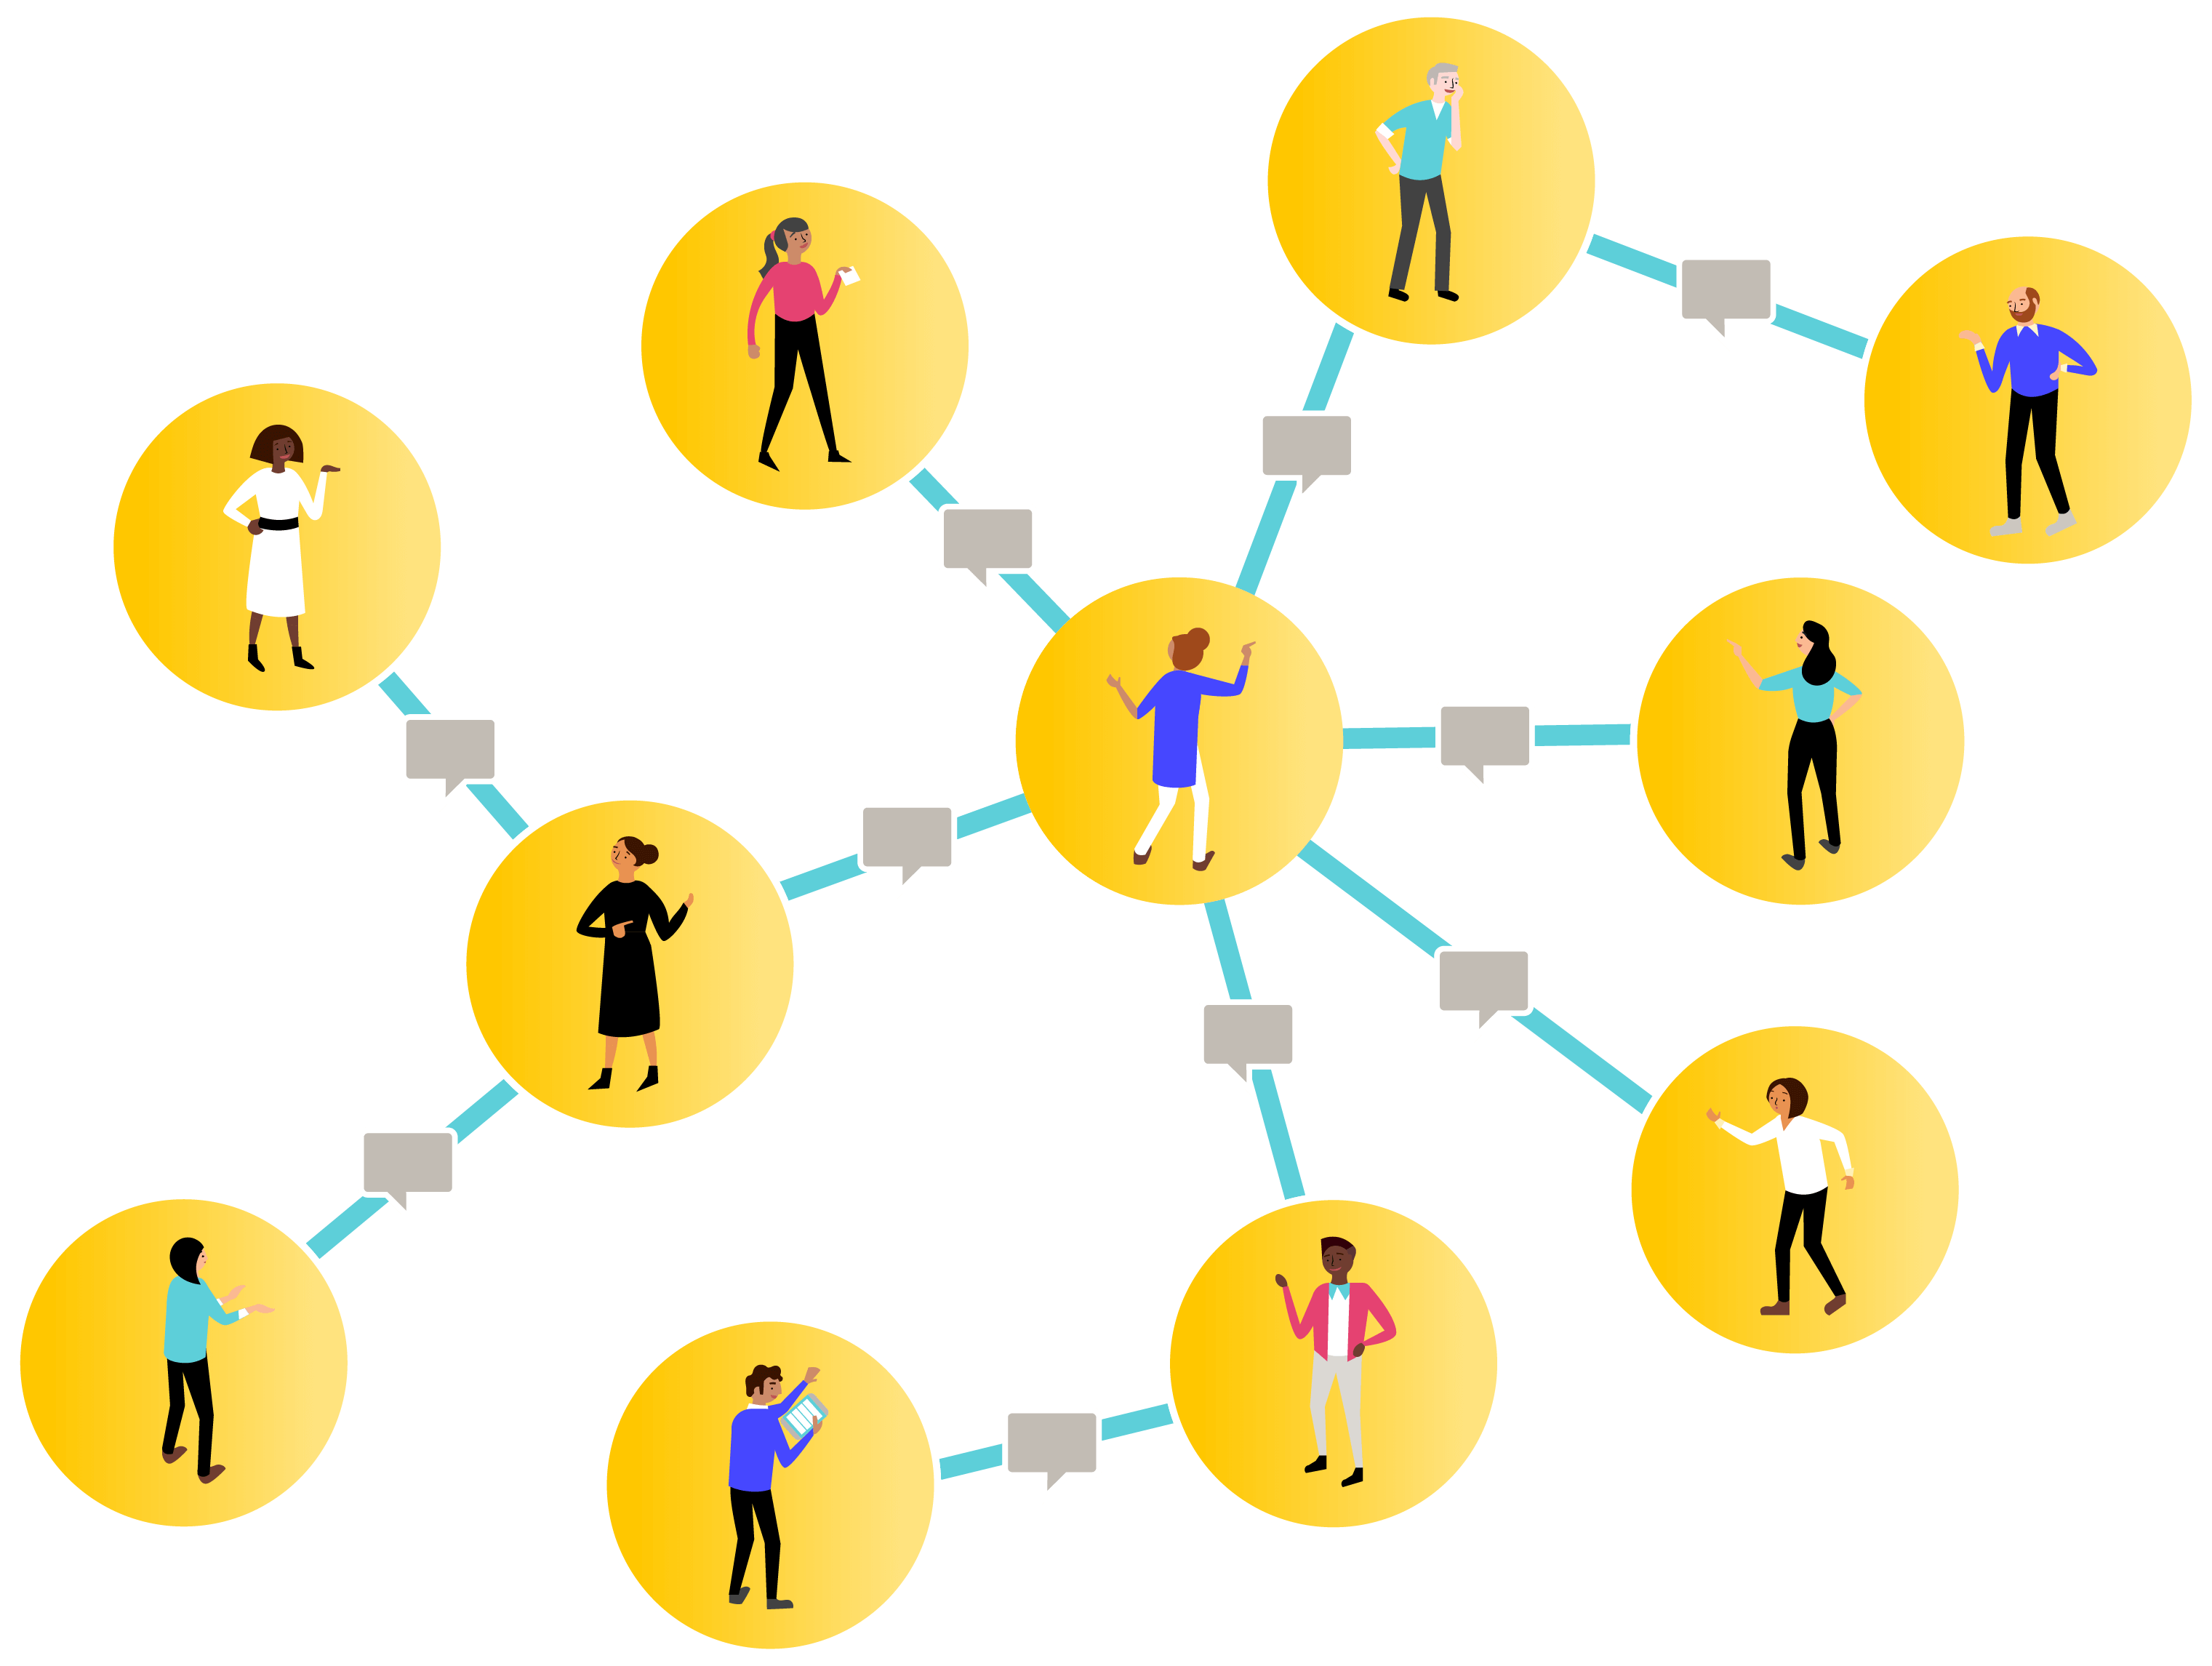 People networks collaboration and communication